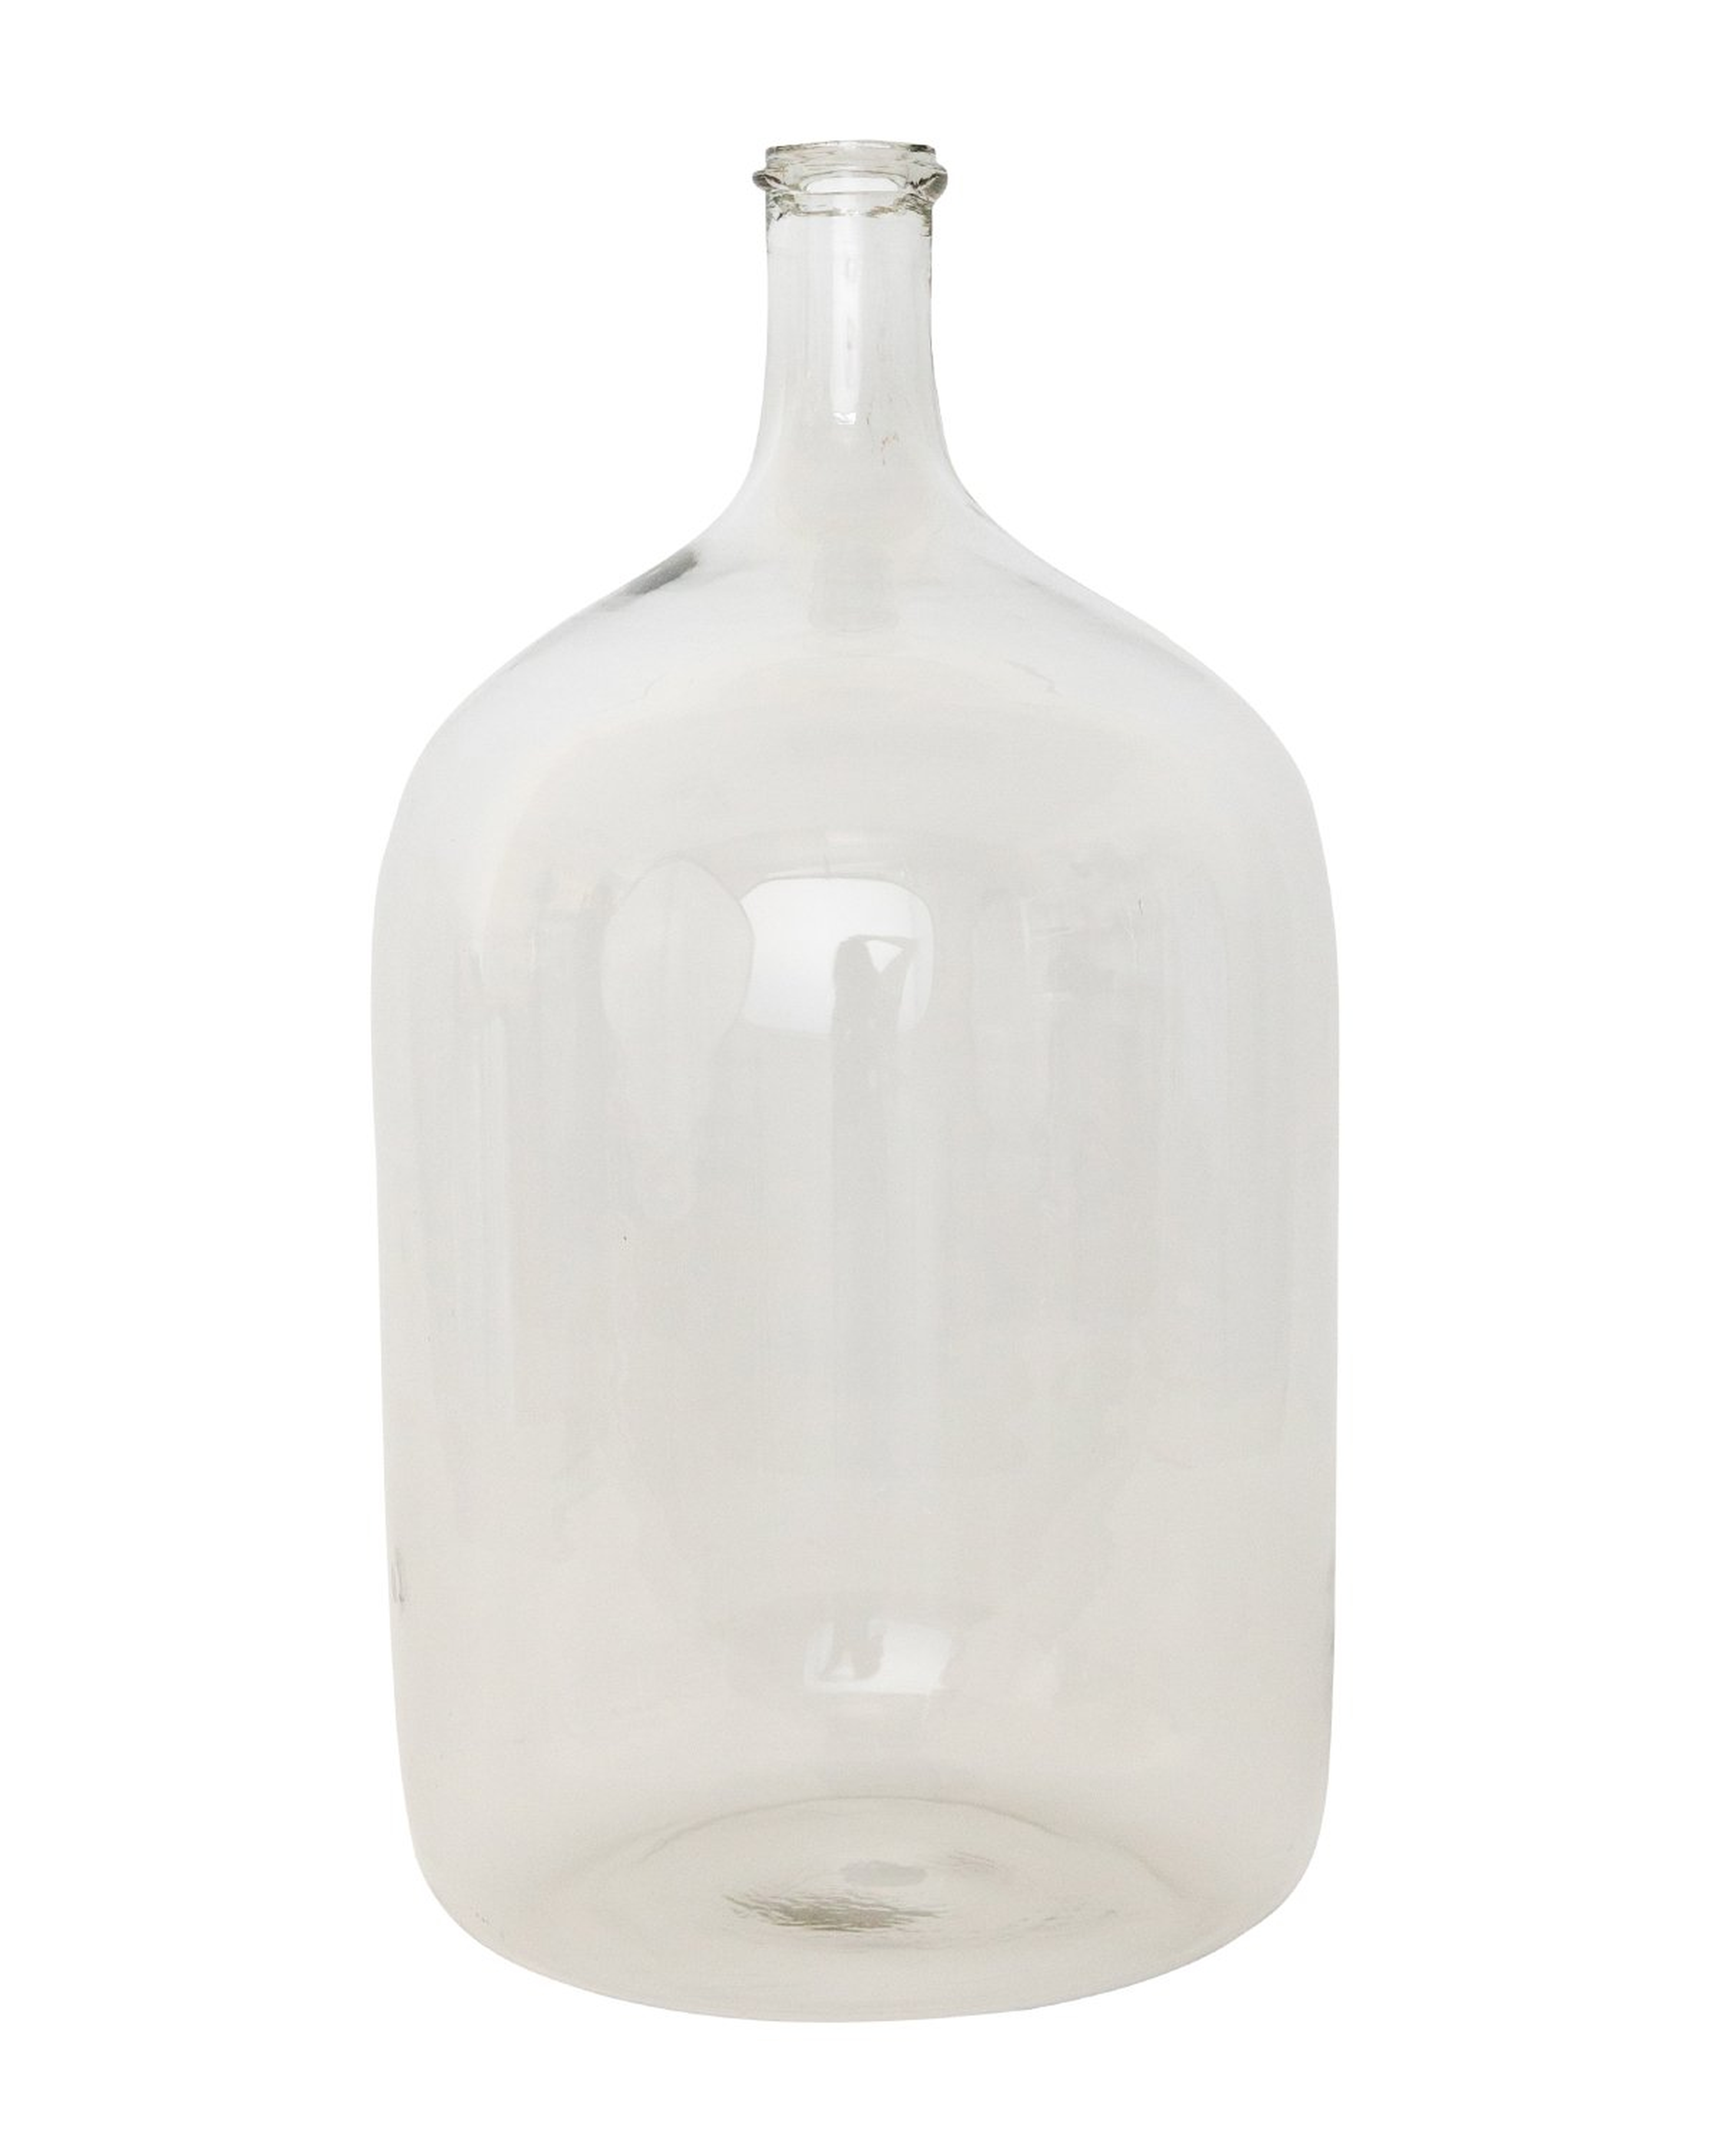 VINTAGE GLASS BOTTLE - McGee & Co.